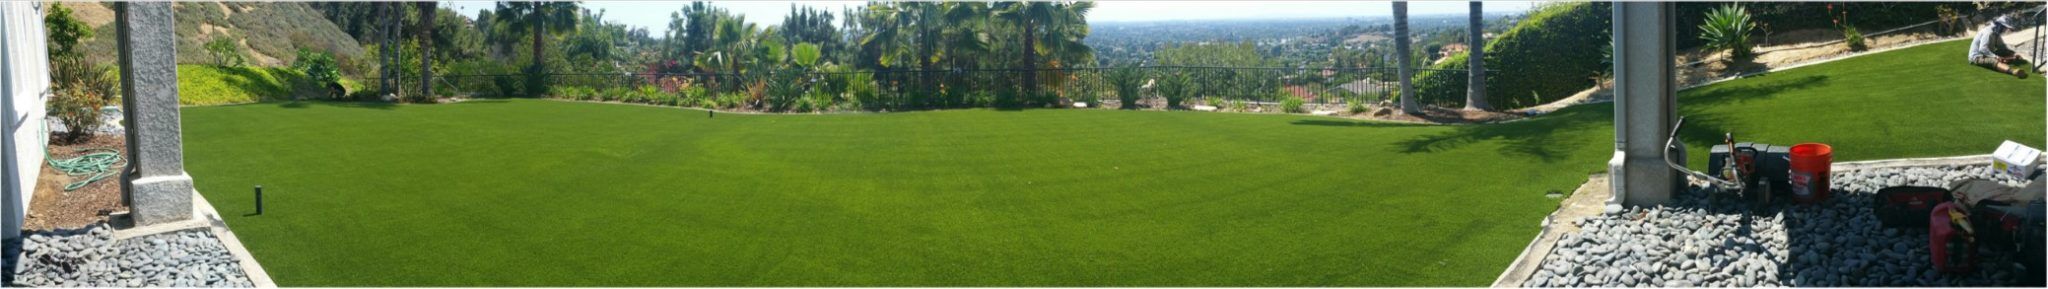 Artificial Grass Products, Turf -Yards, Golf, Play & Pet Areas Mission Viejo